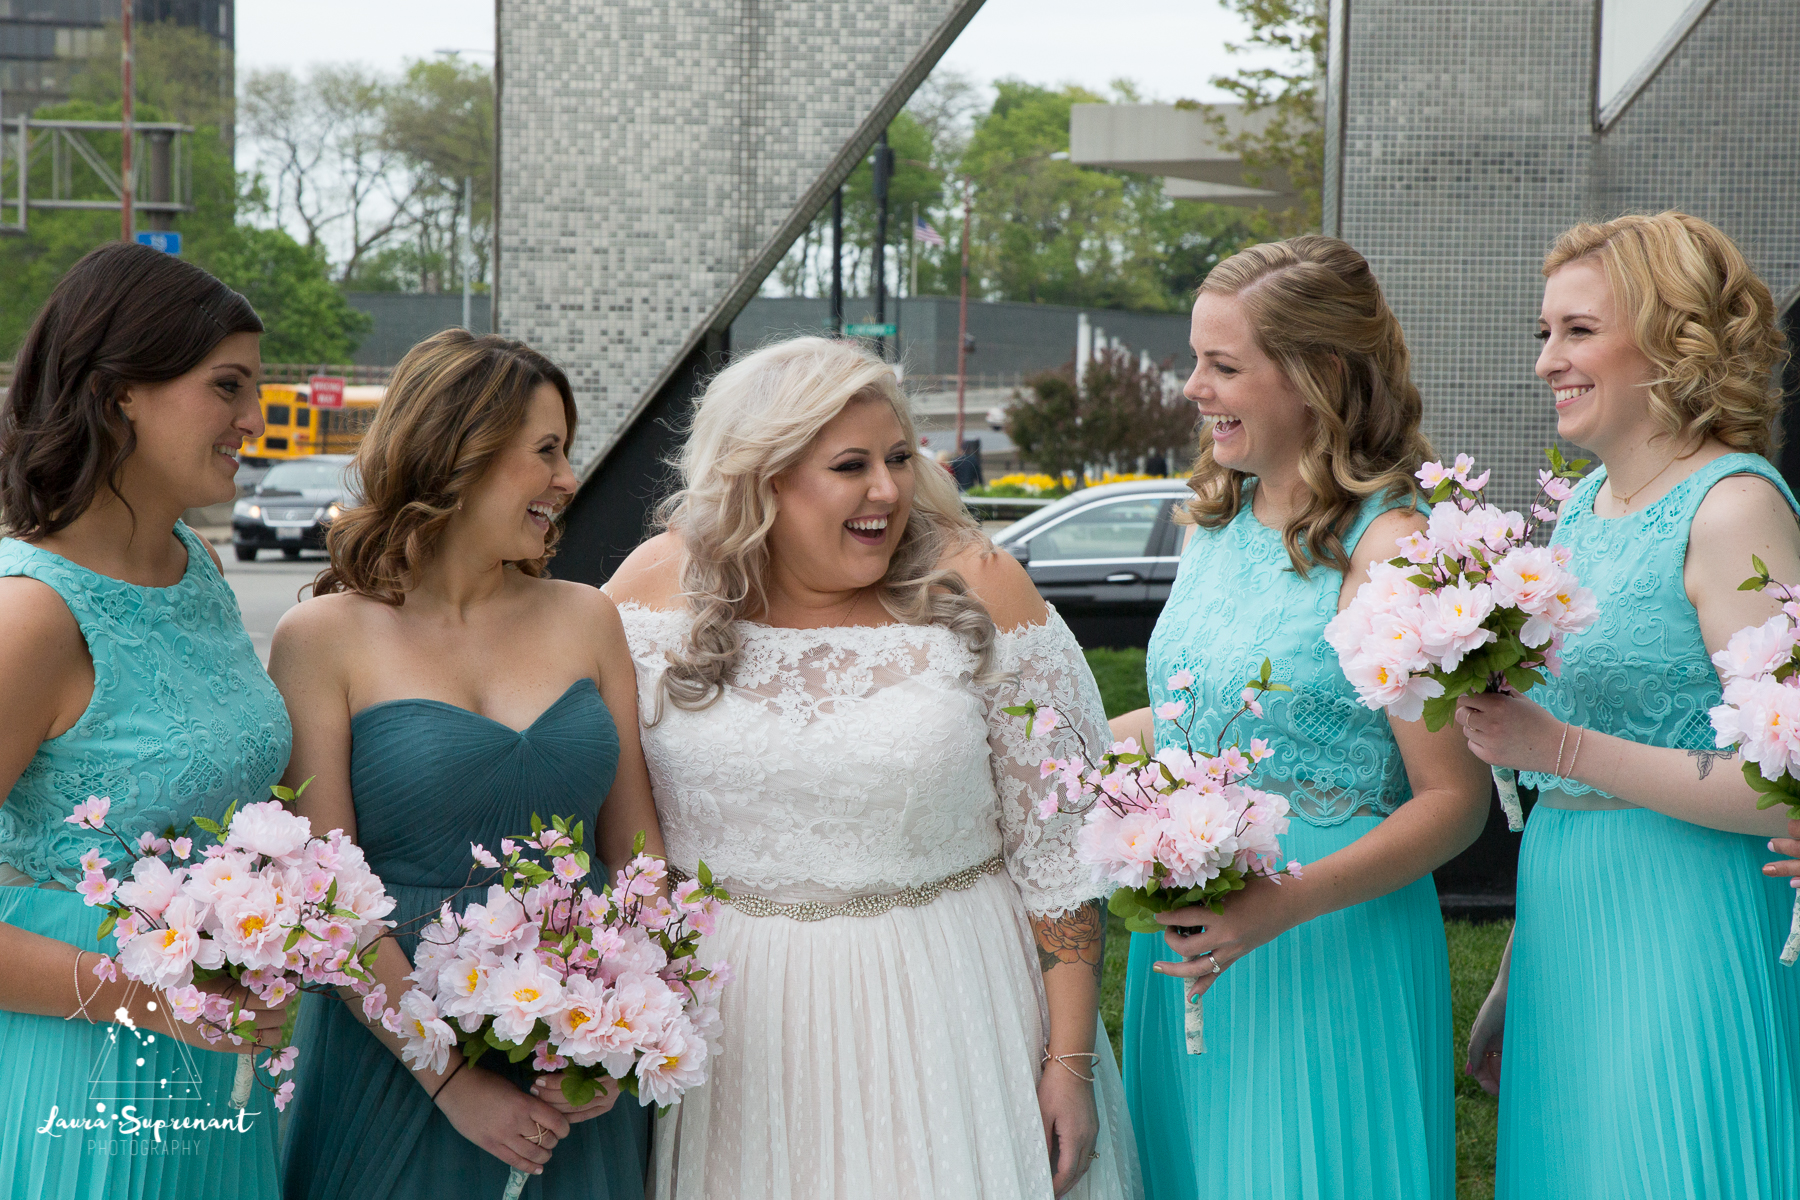 wedding_photography_chicago_wrigley_field_ravenswood_event_center_laura_suprenant (76 of 82).jpg